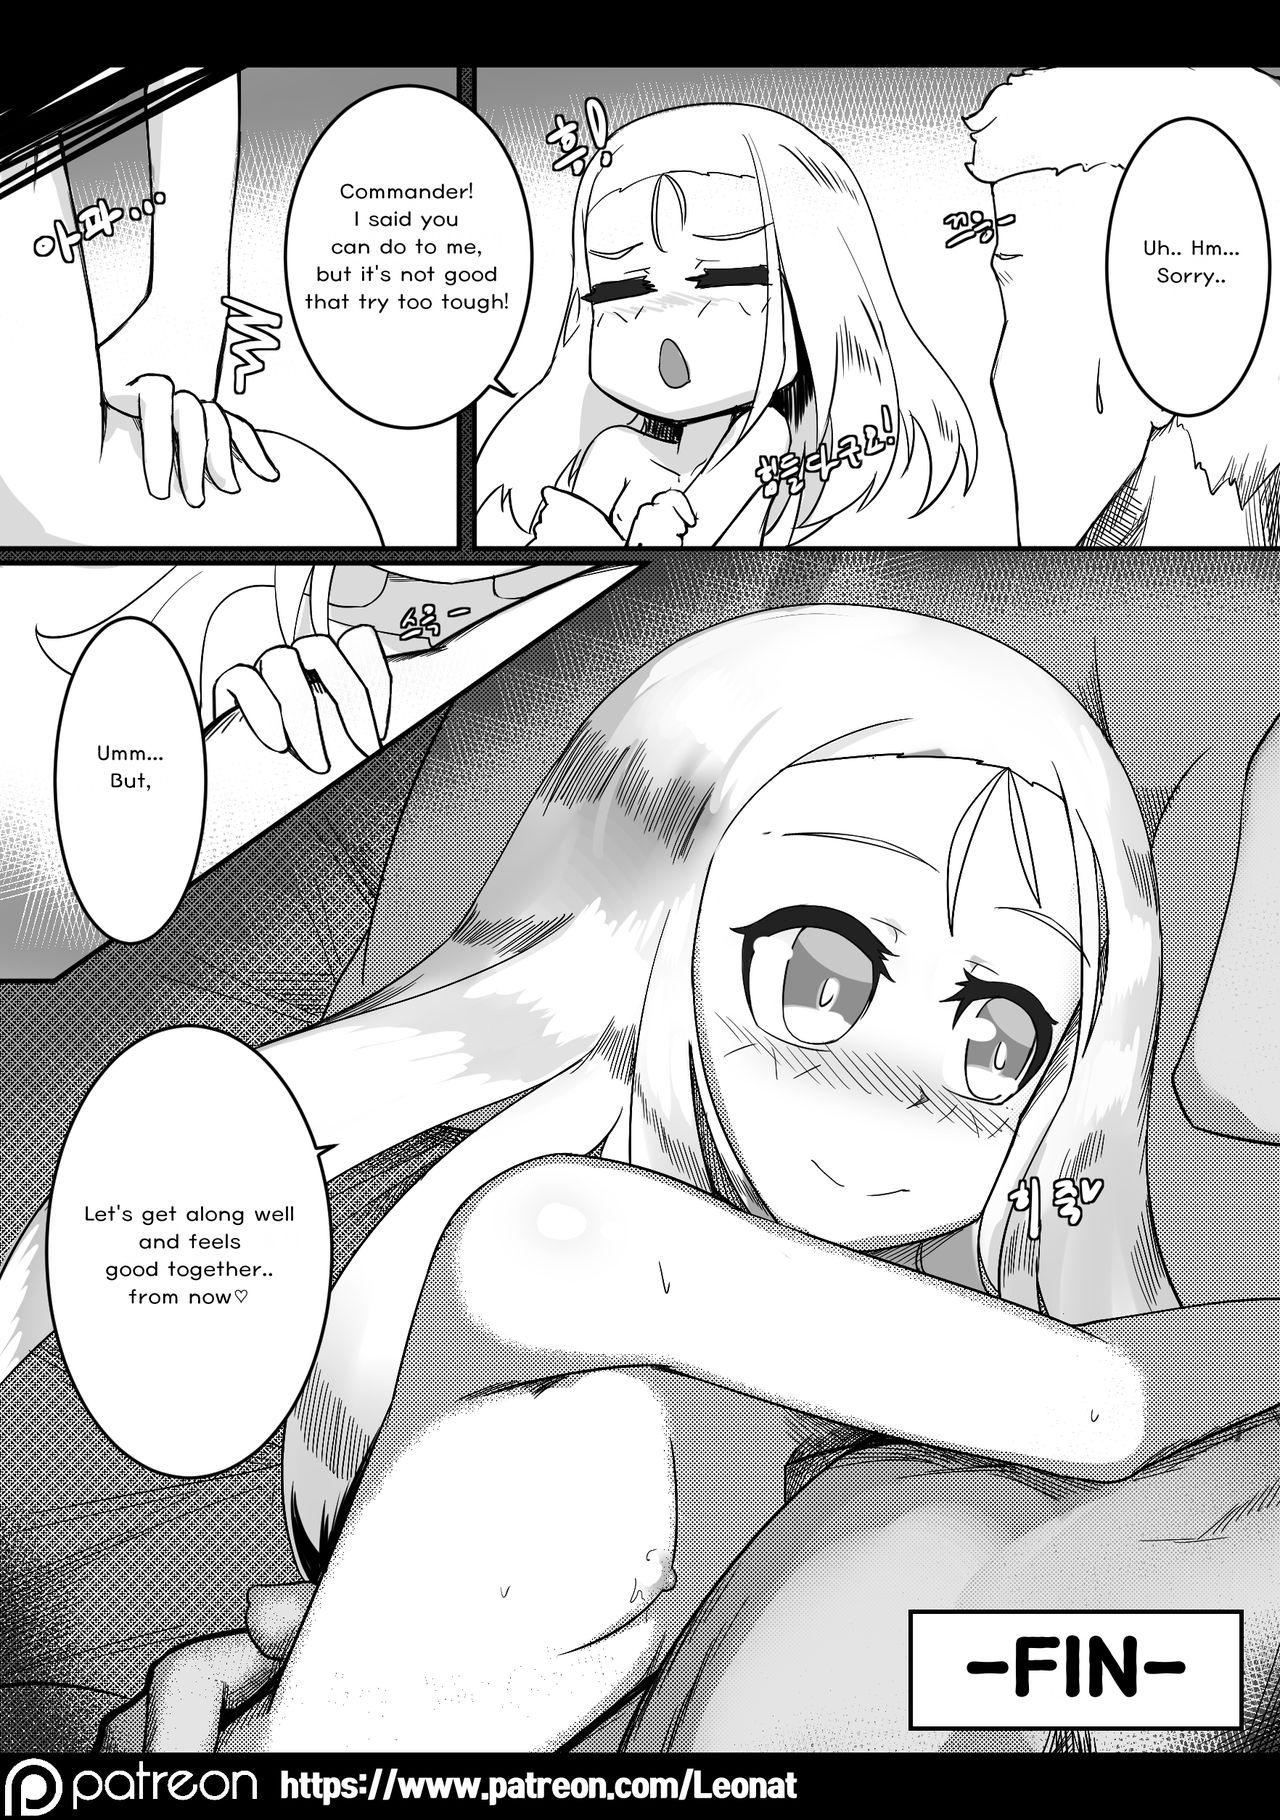 Best Blowjobs Lounge of HQ vol.2 - Girls frontline Femdom - Page 20